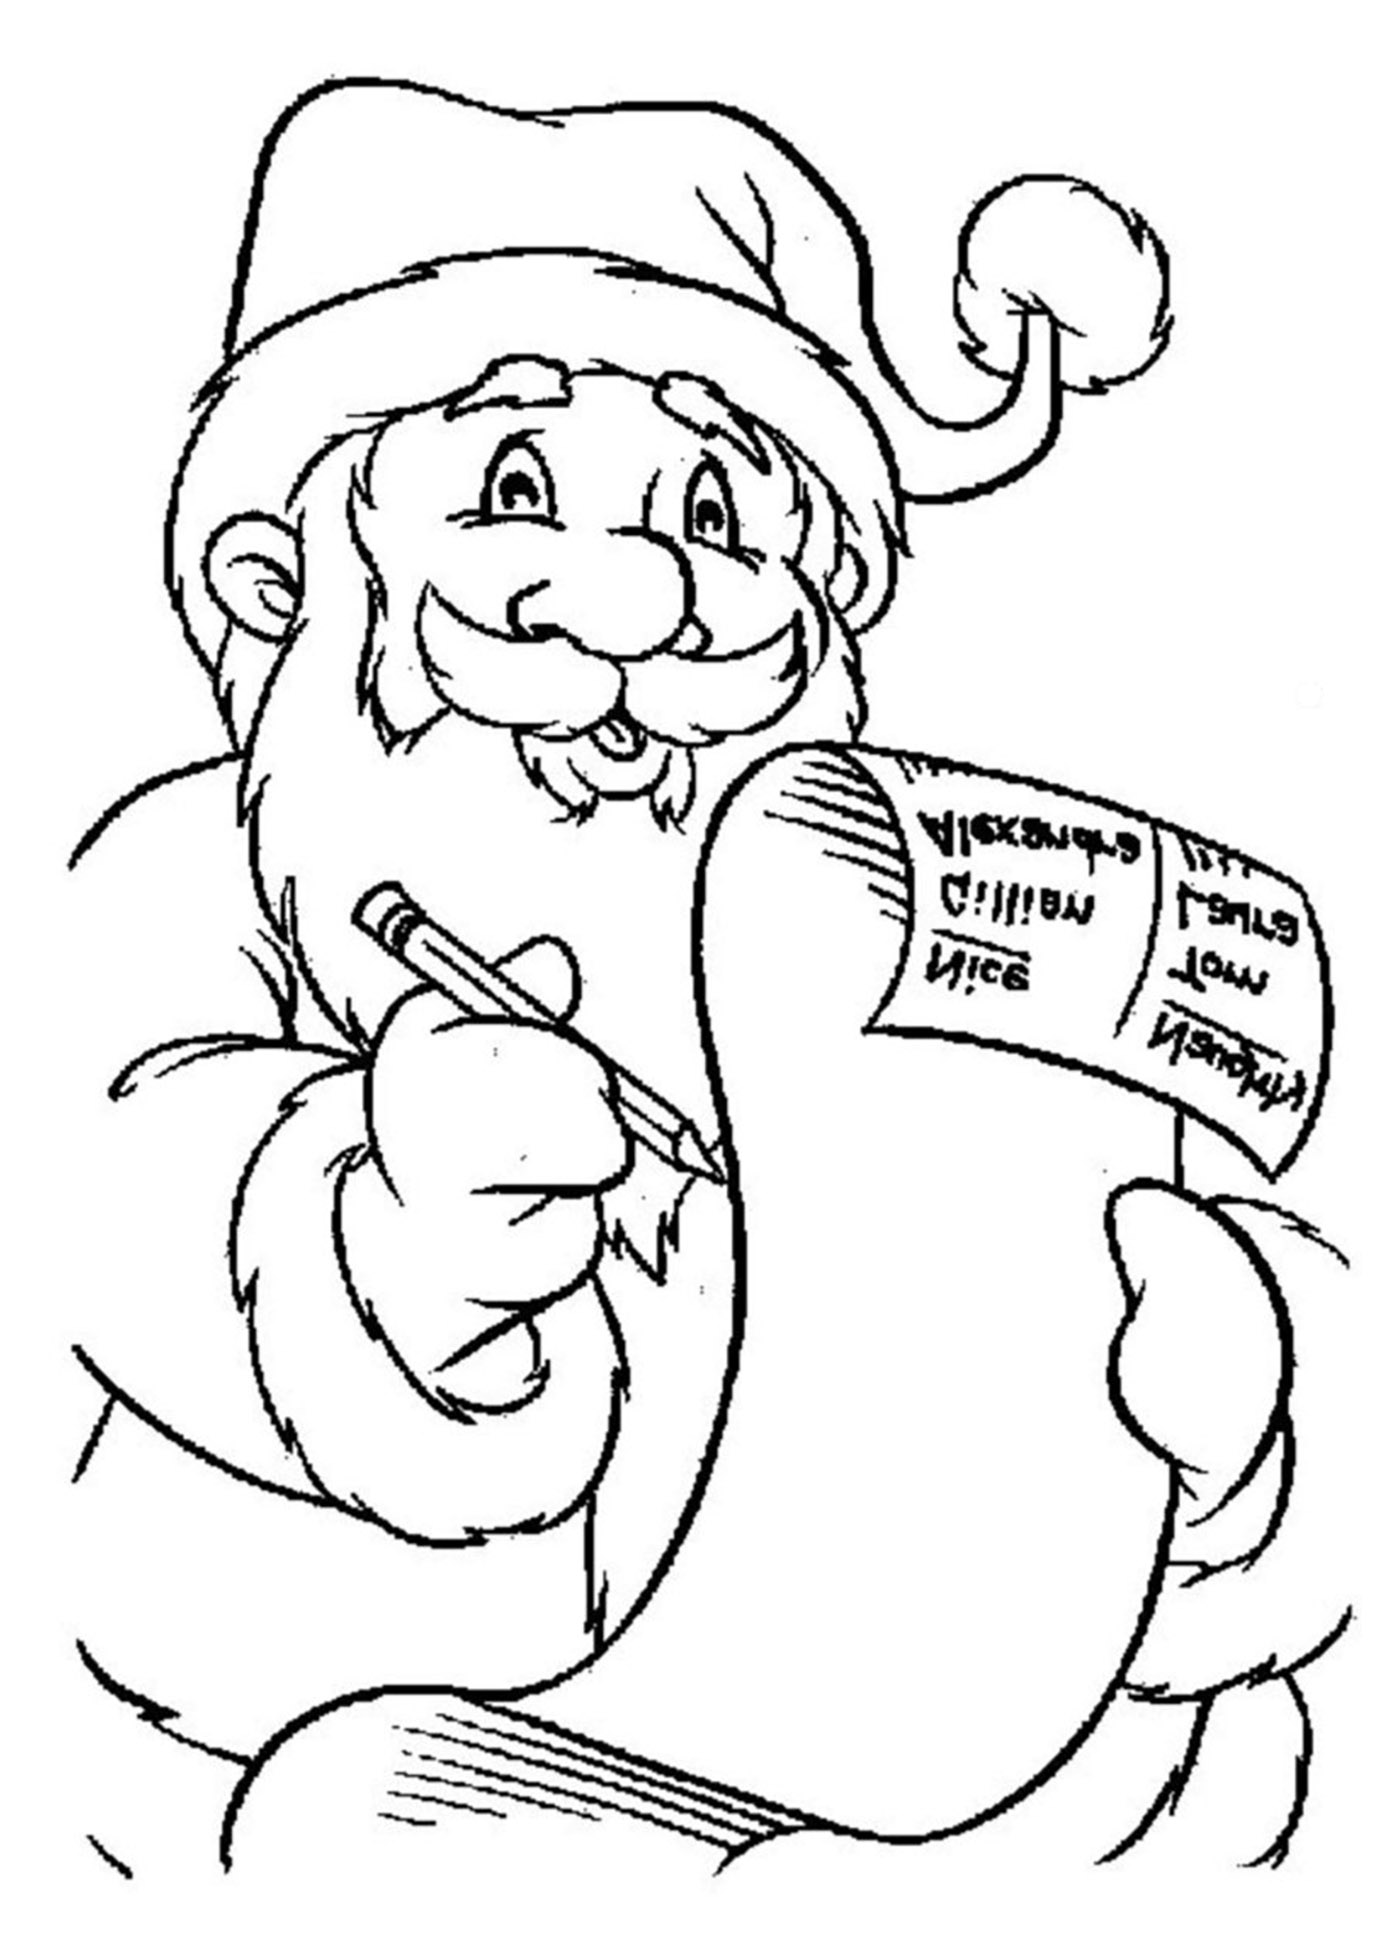 Santa claus letter - Christmas Coloring pages for kids to print & color